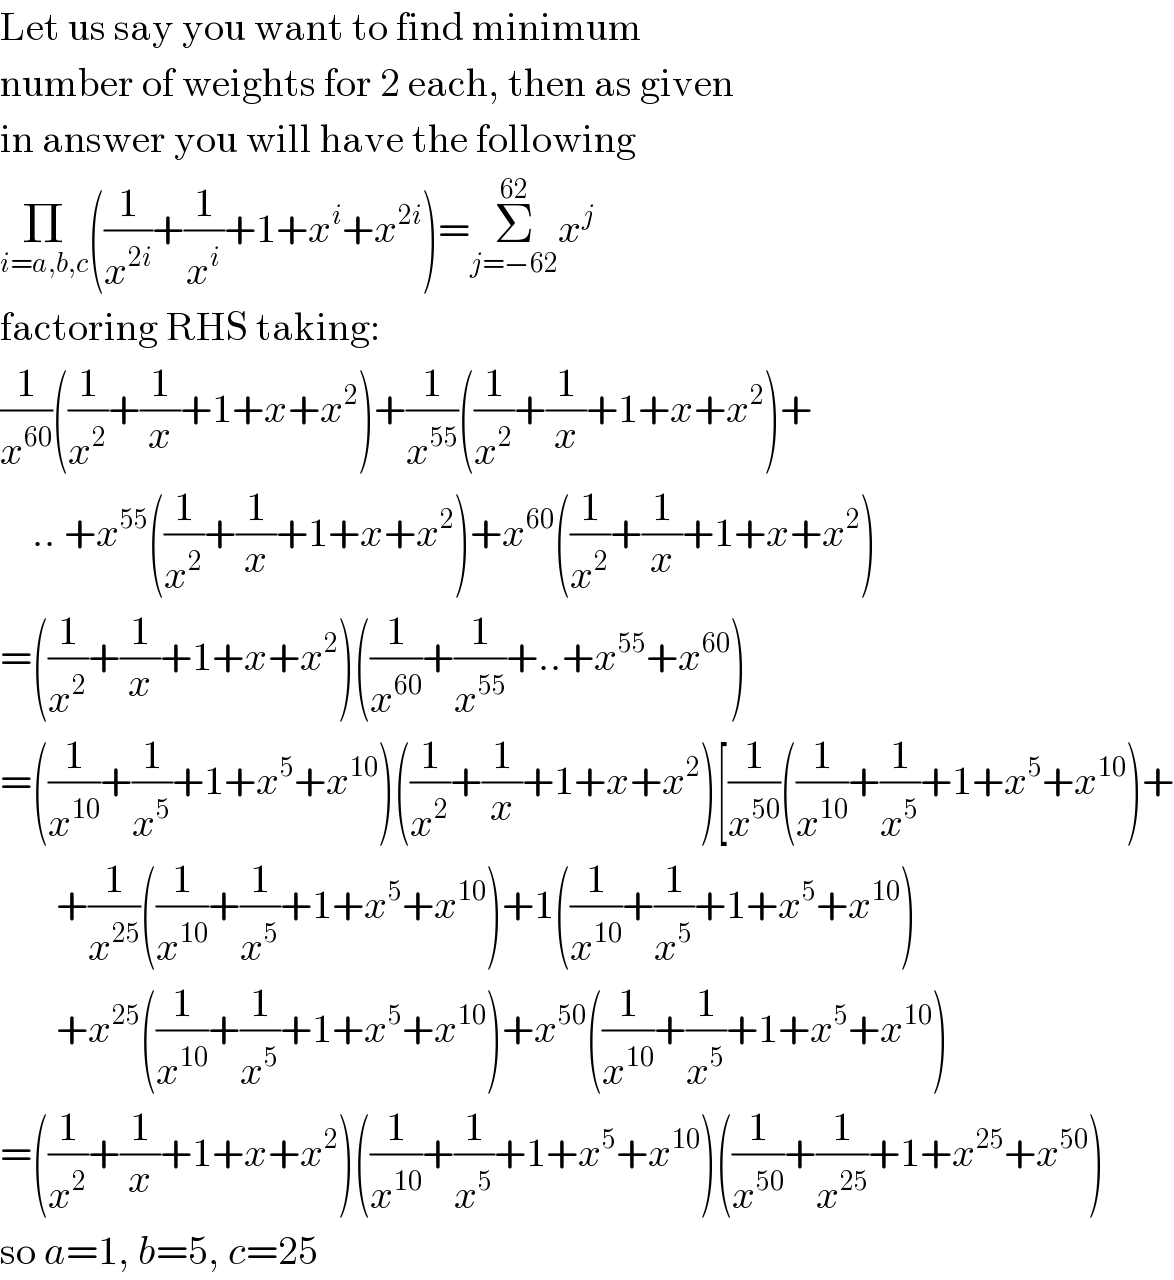 Let us say you want to find minimum  number of weights for 2 each, then as given  in answer you will have the following  Π_(i=a,b,c) ((1/x^(2i) )+(1/x^i )+1+x^i +x^(2i) )=Σ_(j=−62) ^(62) x^j   factoring RHS taking:  (1/x^(60) )((1/x^2 )+(1/x)+1+x+x^2 )+(1/x^(55) )((1/x^2 )+(1/x)+1+x+x^2 )+      .. +x^(55) ((1/x^2 )+(1/x)+1+x+x^2 )+x^(60) ((1/x^2 )+(1/x)+1+x+x^2 )  =((1/x^2 )+(1/x)+1+x+x^2 )((1/x^(60) )+(1/x^(55) )+..+x^(55) +x^(60) )  =((1/x^(10) )+(1/x^5 )+1+x^5 +x^(10) )((1/x^2 )+(1/x)+1+x+x^2 )[(1/x^(50) )((1/x^(10) )+(1/x^5 )+1+x^5 +x^(10) )+         +(1/x^(25) )((1/x^(10) )+(1/x^5 )+1+x^5 +x^(10) )+1((1/x^(10) )+(1/x^5 )+1+x^5 +x^(10) )         +x^(25) ((1/x^(10) )+(1/x^5 )+1+x^5 +x^(10) )+x^(50) ((1/x^(10) )+(1/x^5 )+1+x^5 +x^(10) )  =((1/x^2 )+(1/x)+1+x+x^2 )((1/x^(10) )+(1/x^5 )+1+x^5 +x^(10) )((1/x^(50) )+(1/x^(25) )+1+x^(25) +x^(50) )  so a=1, b=5, c=25  